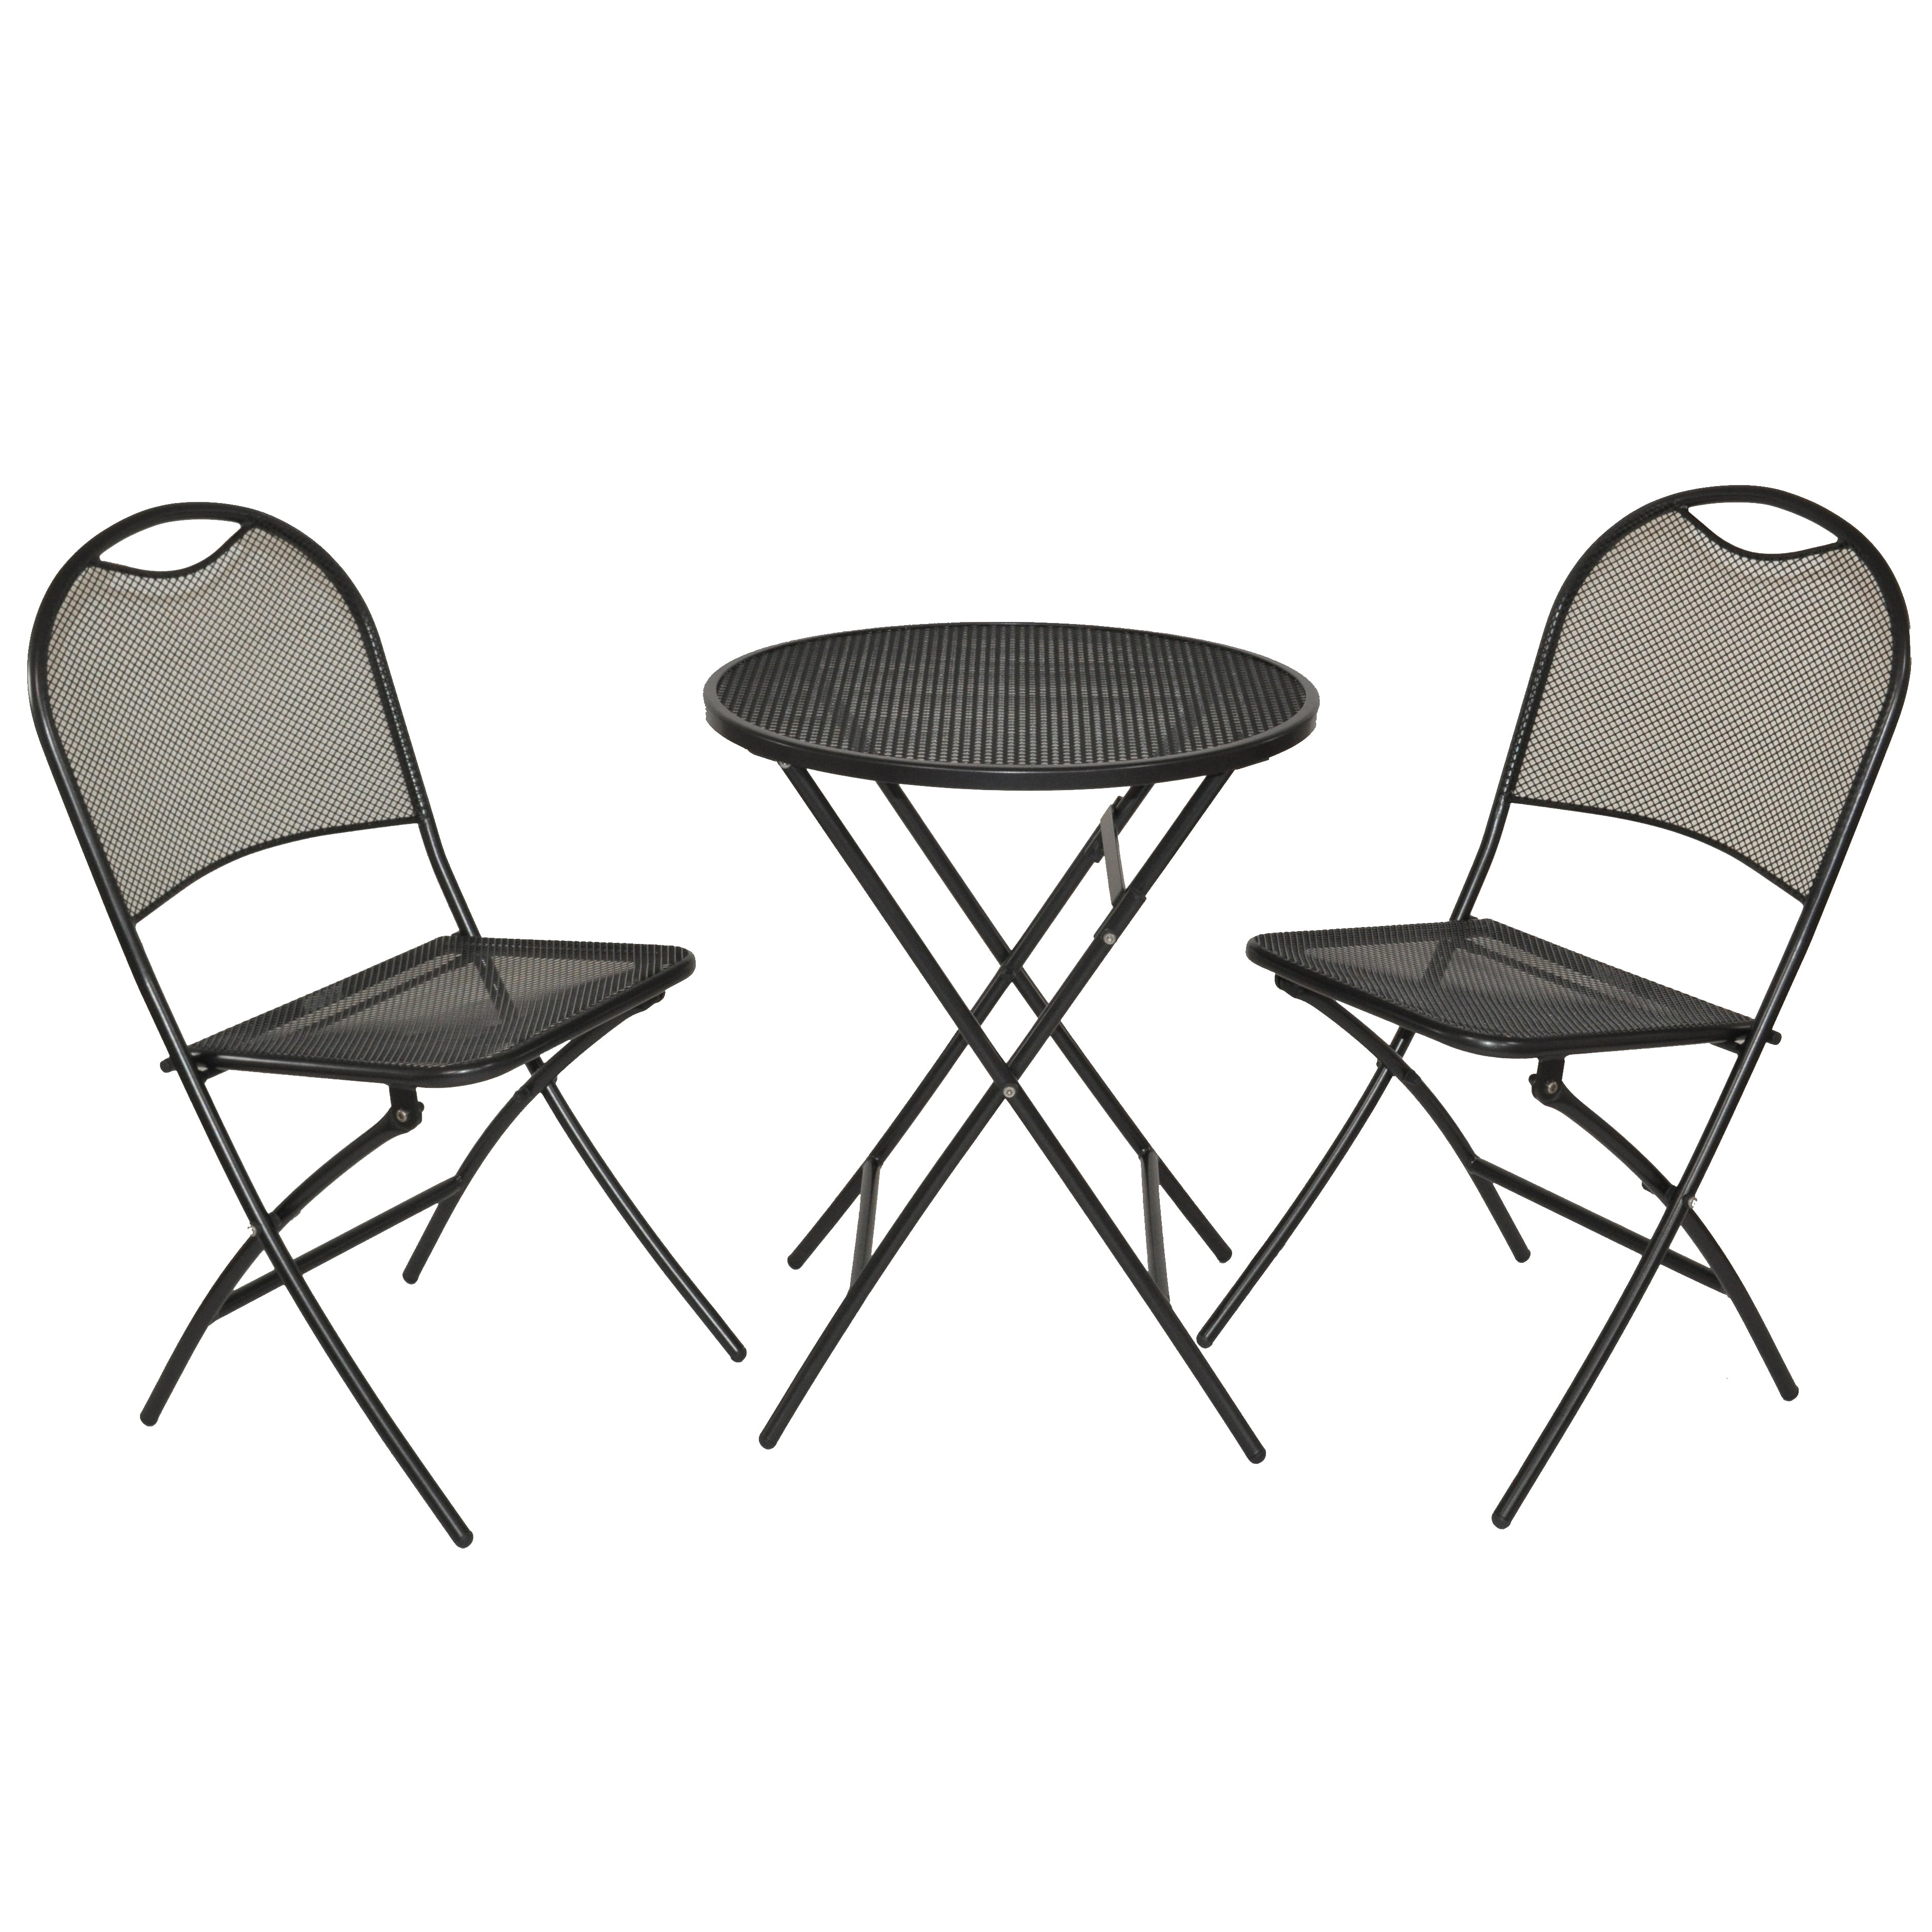 High quality foldable wrought iron set with two chairs and a table